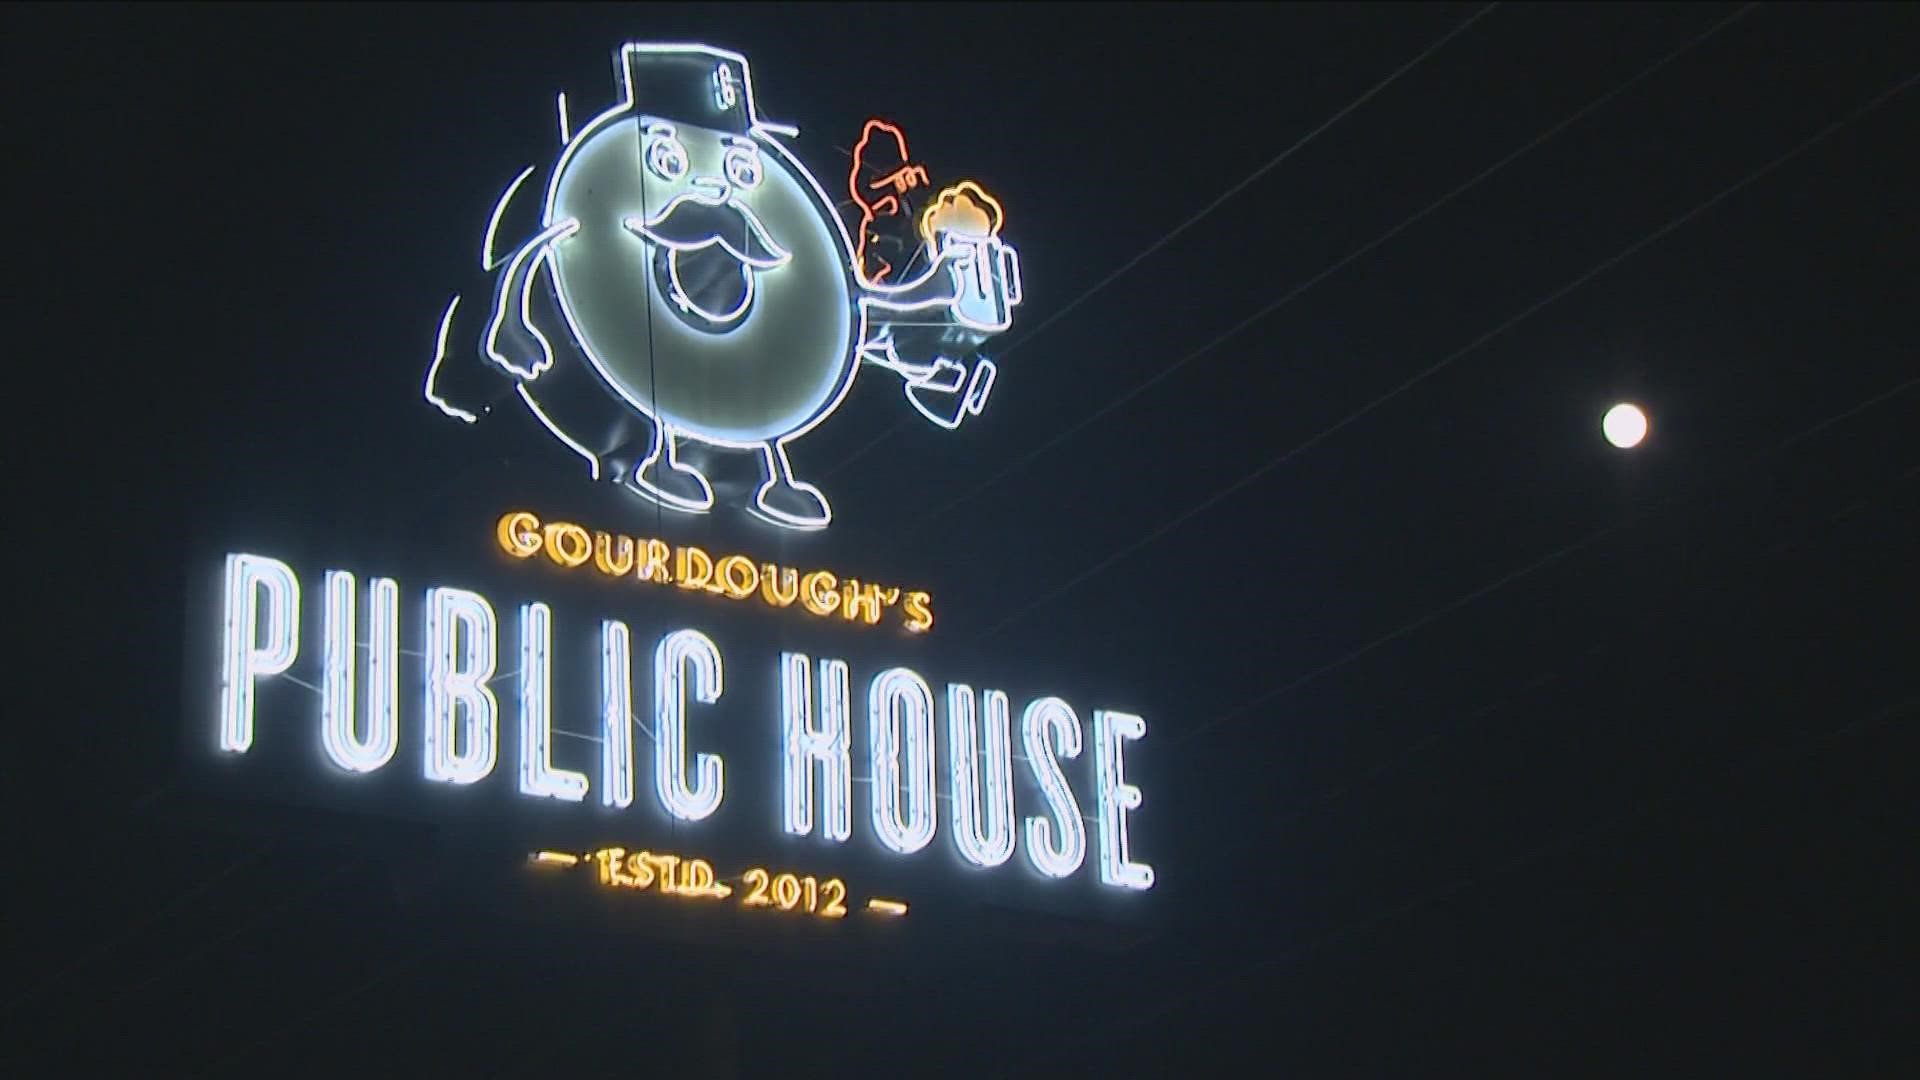 Gourdough's Public House on South Lamar Boulevard closed its doors on Sunday. The business said it was priced out but will continue operating its food trucks.